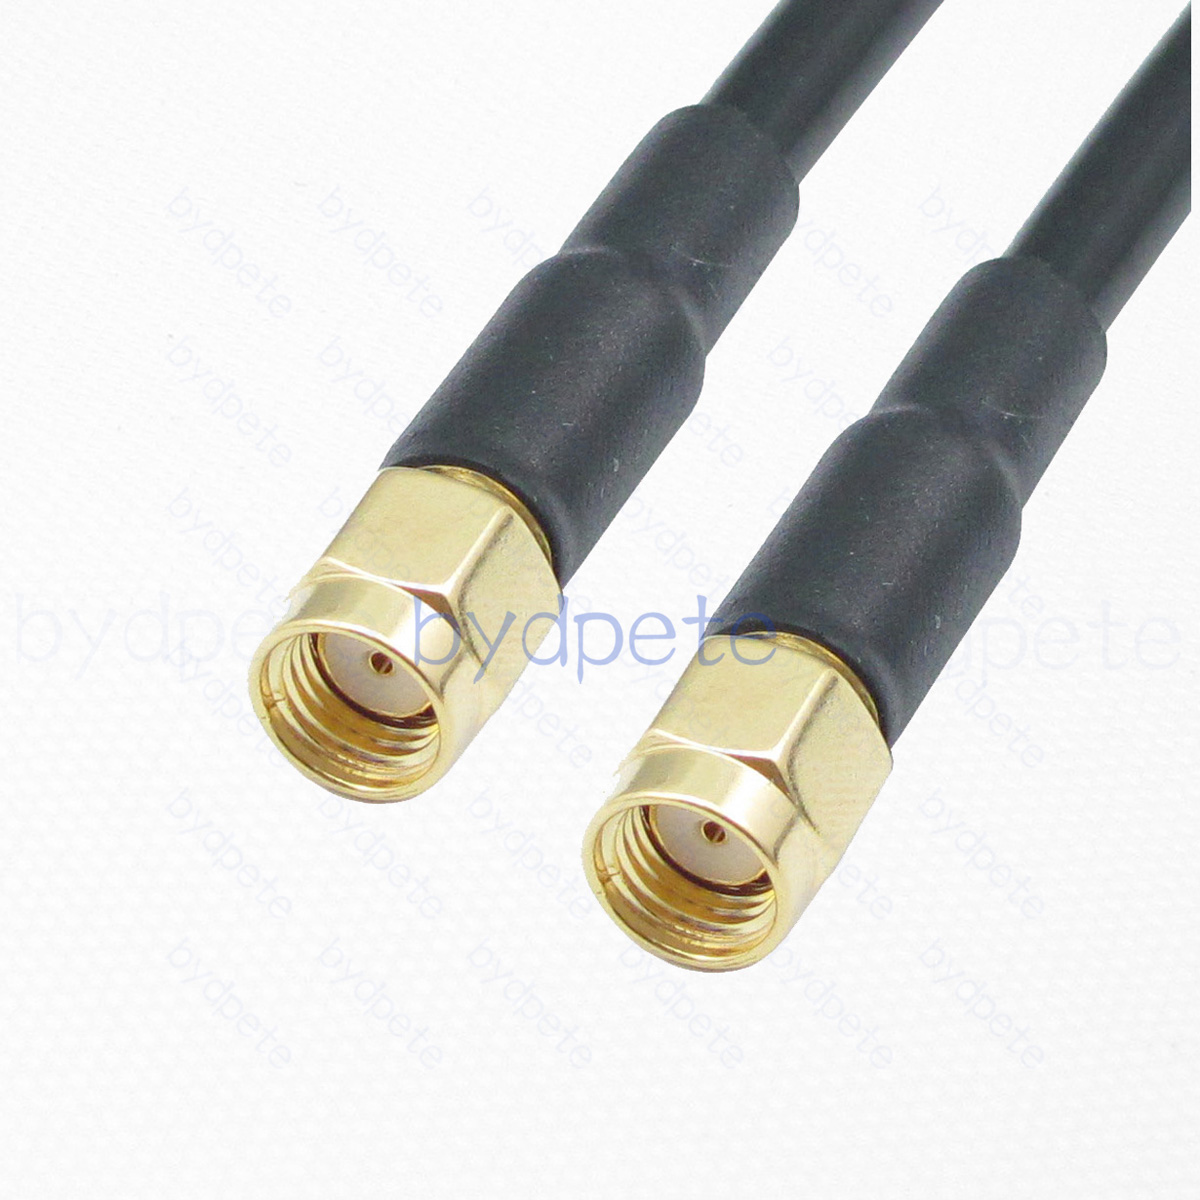 RP-SMA male to RP-SMA male Reverse polarity RG58 Coax Coaxial 50ohm Cable RF Lot bydpete BYDC013SMA58